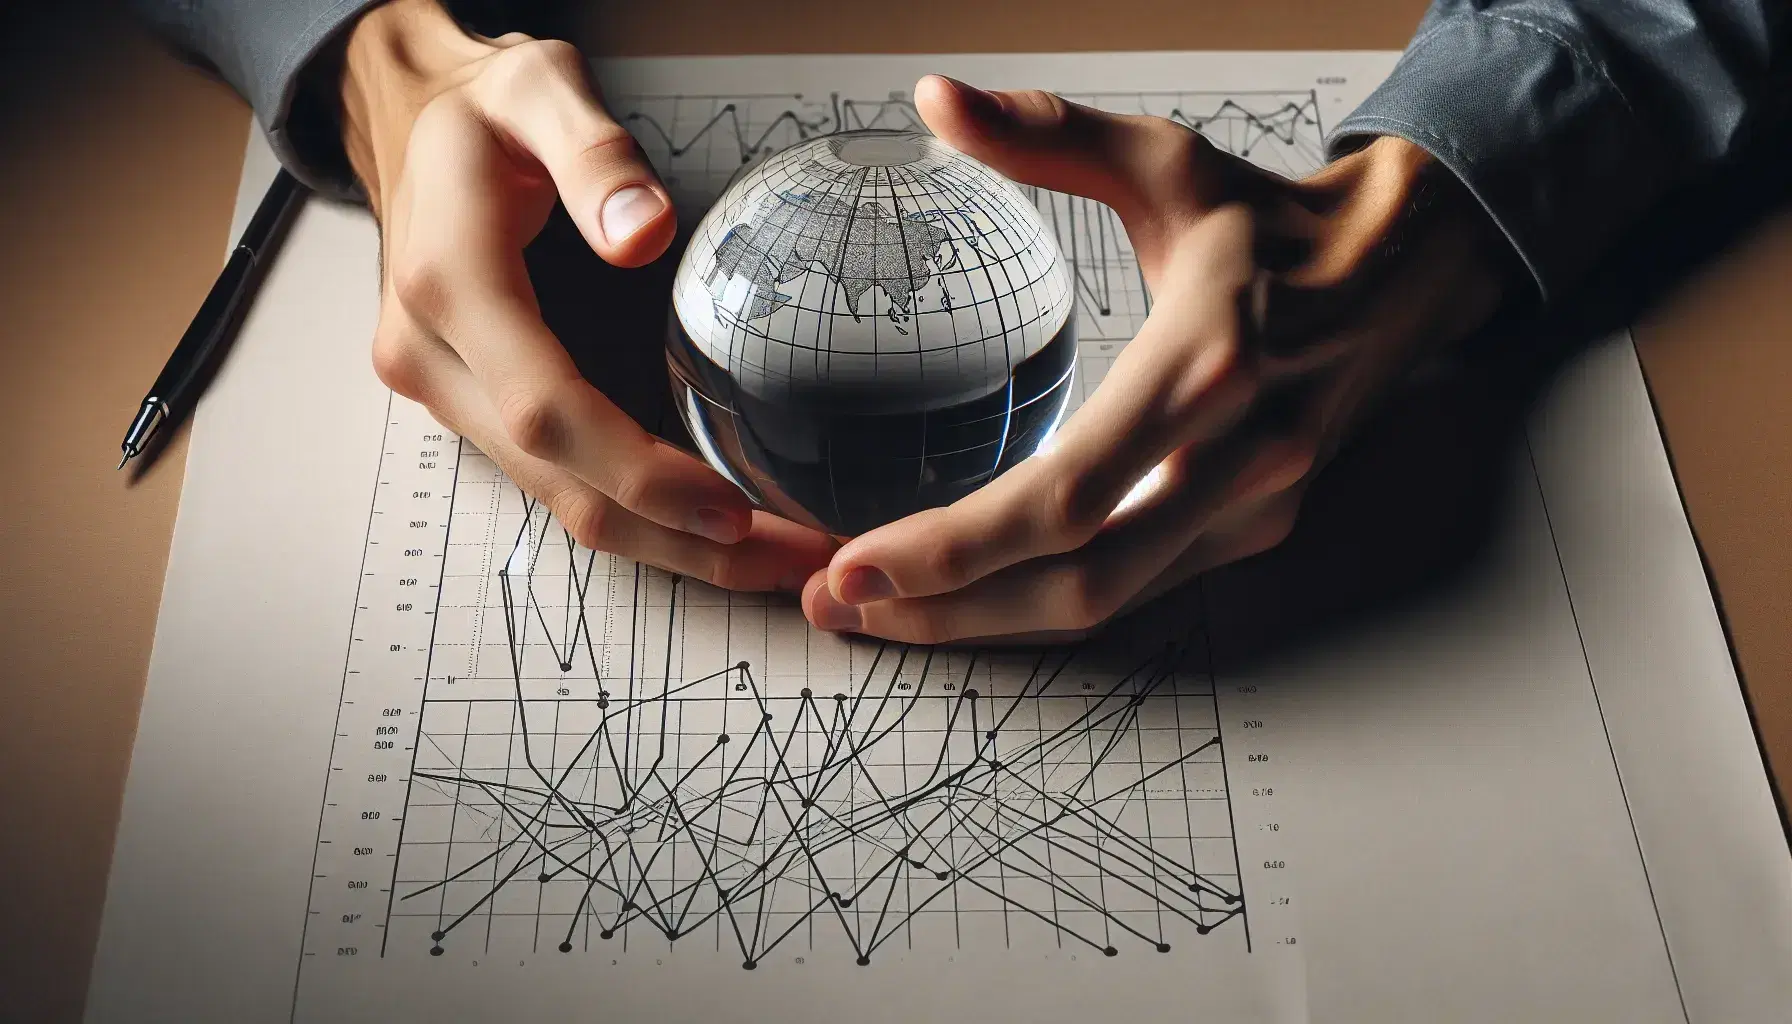 Hands cradling a crystal ball magnifying a complex, label-free graph chart on a desk, with blurred office supplies in the background.